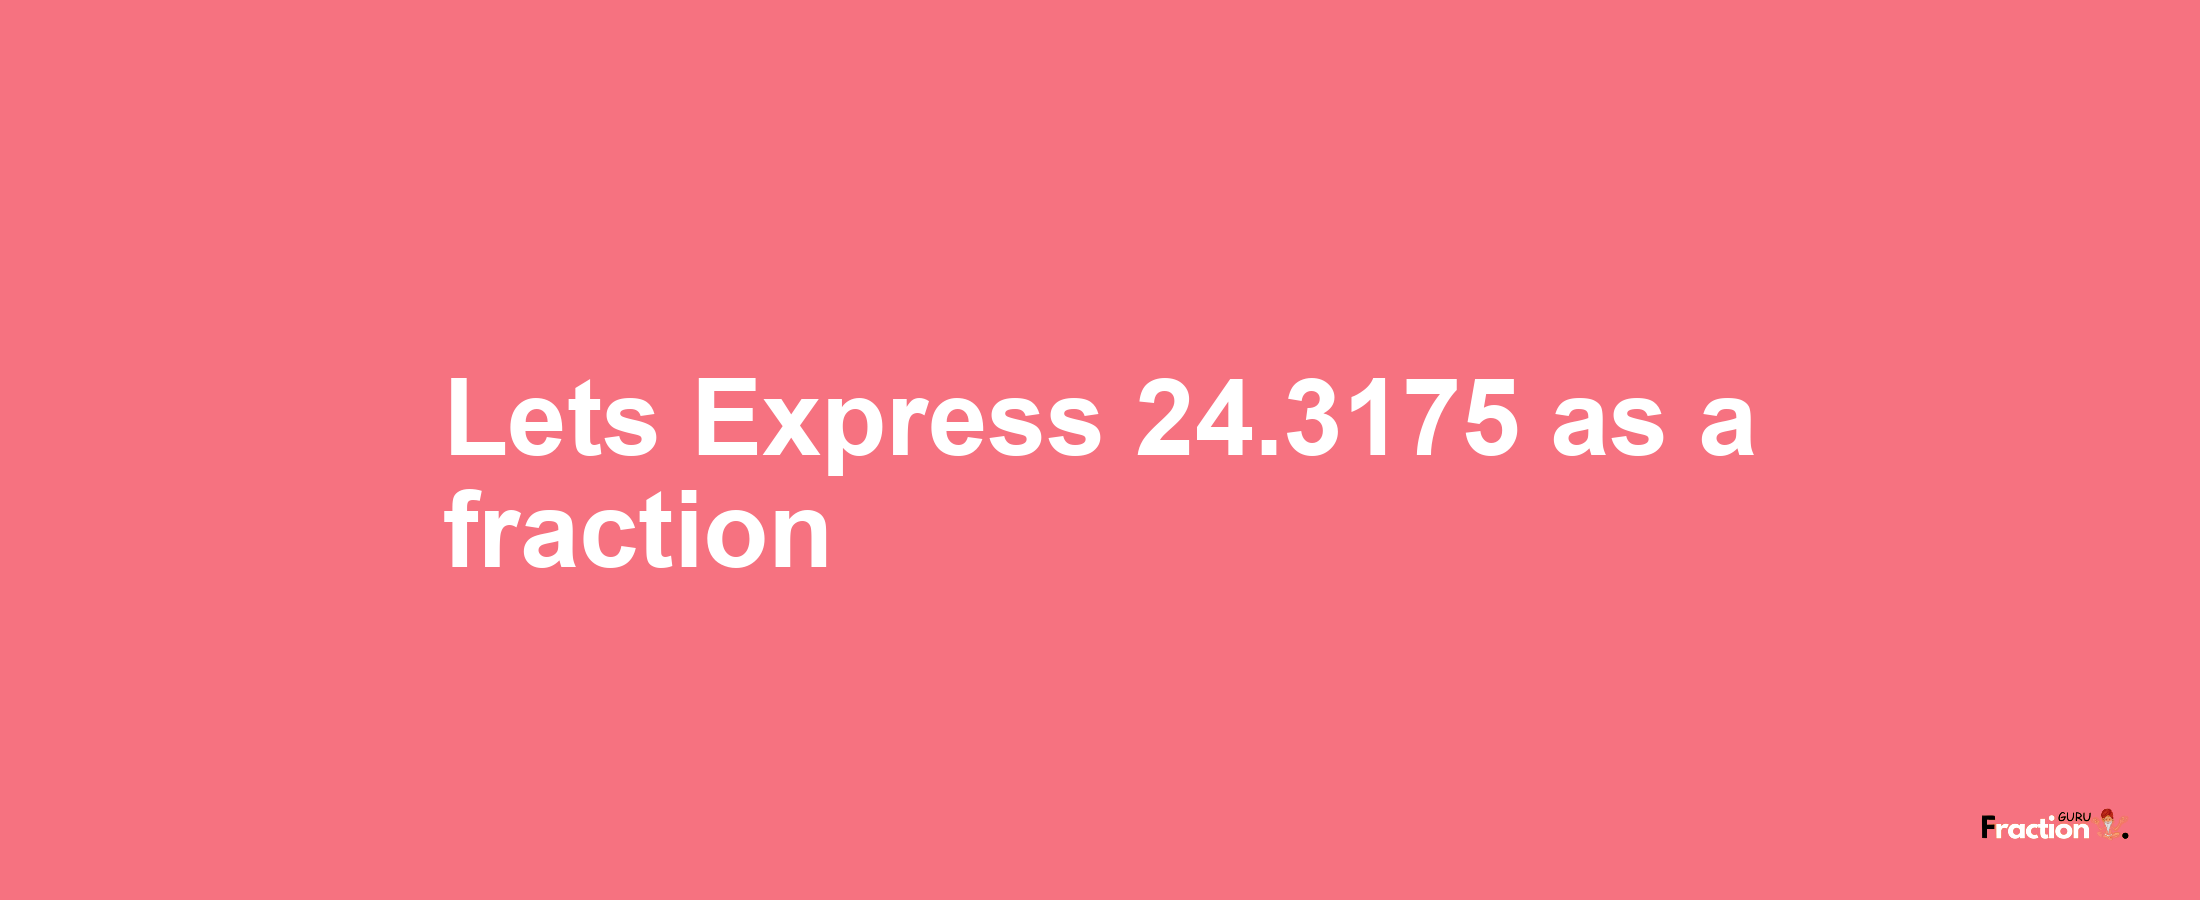 Lets Express 24.3175 as afraction